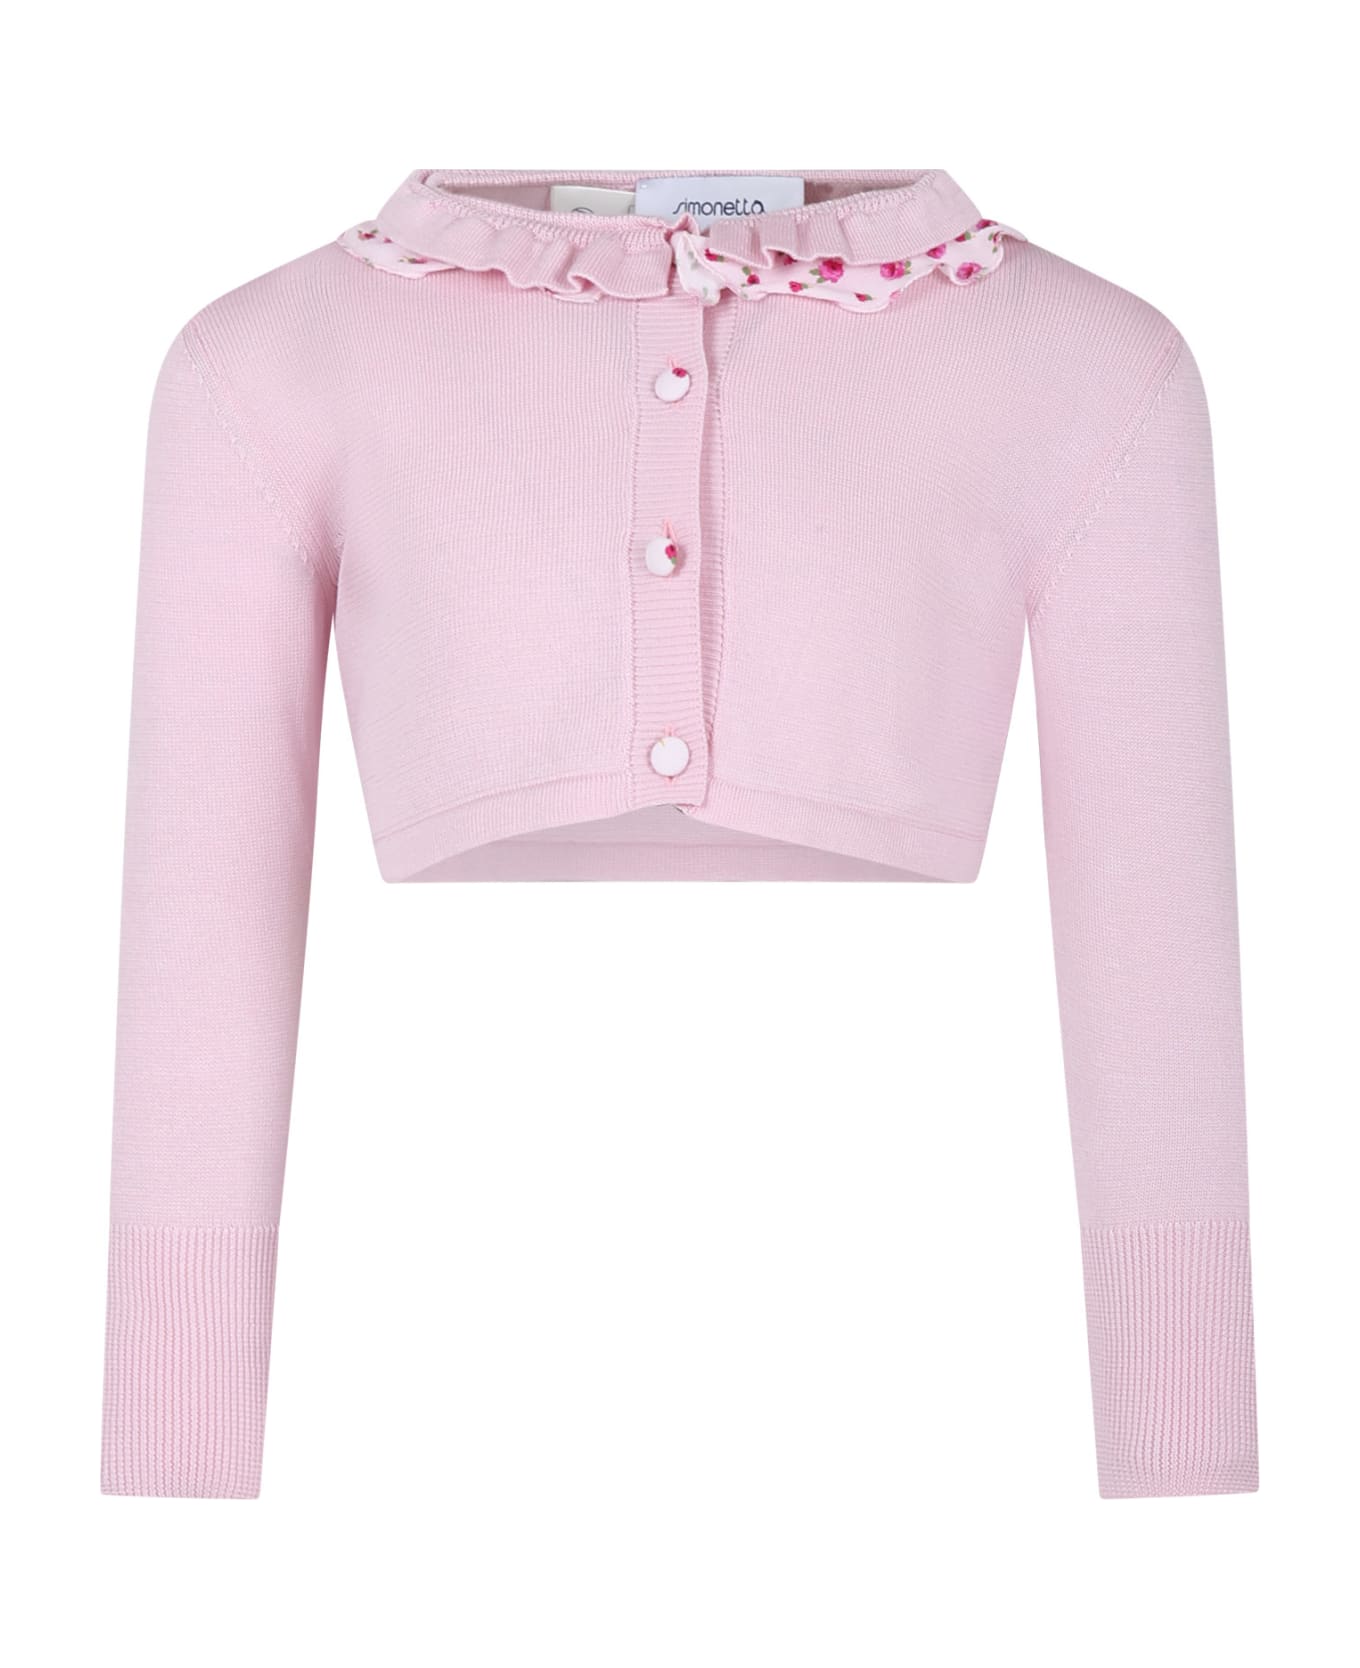 Simonetta Pink Cardigan For Girl With Flowers Print - Pink